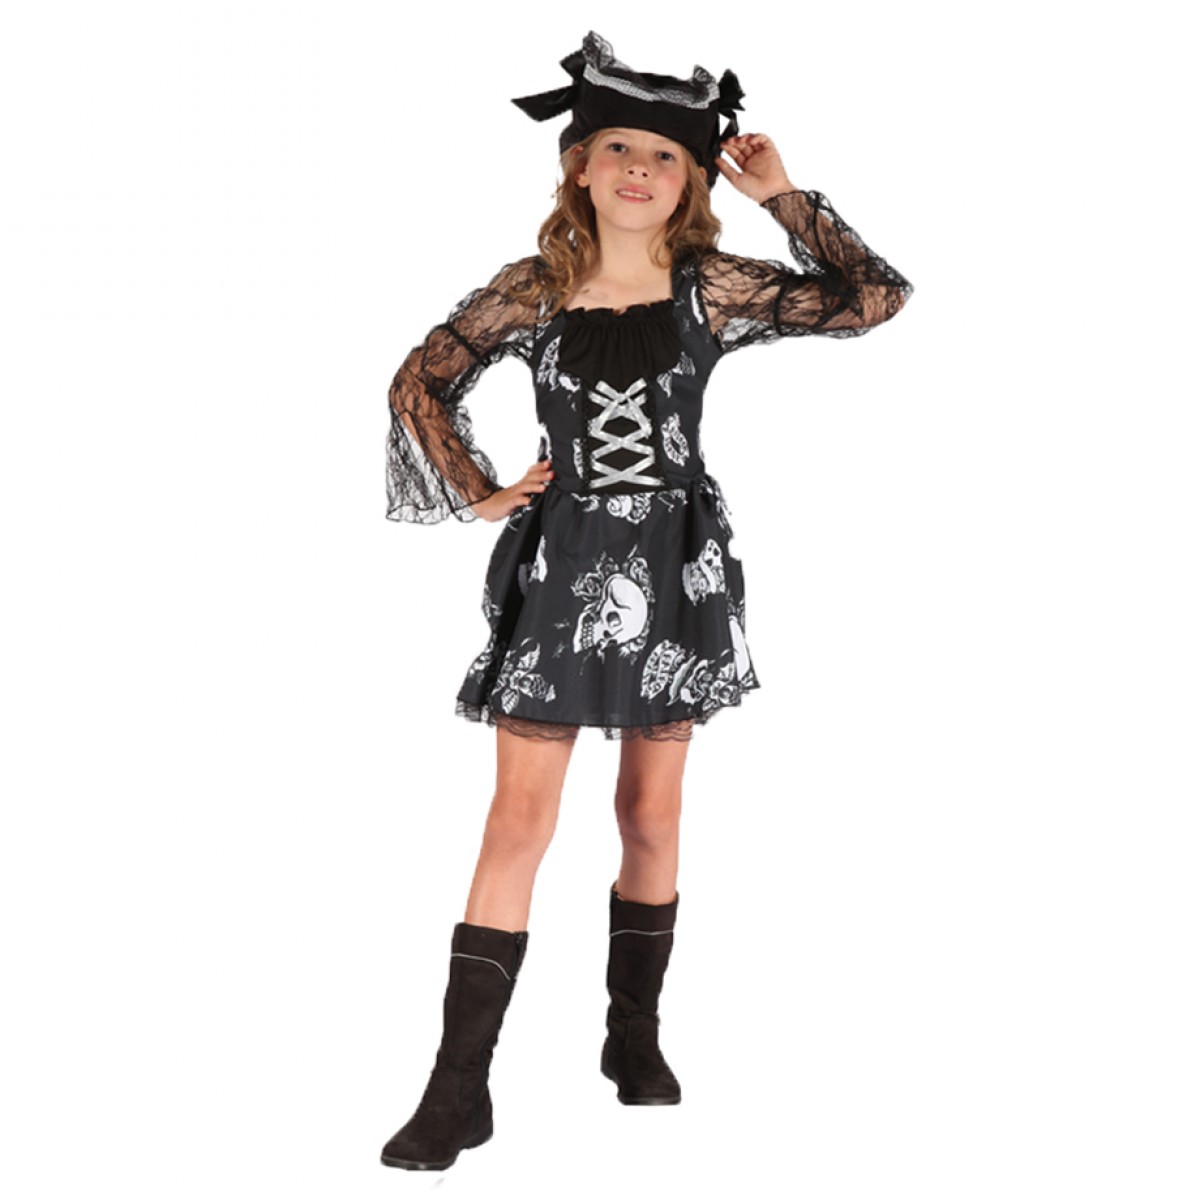 Partylicious | Girls Costumes